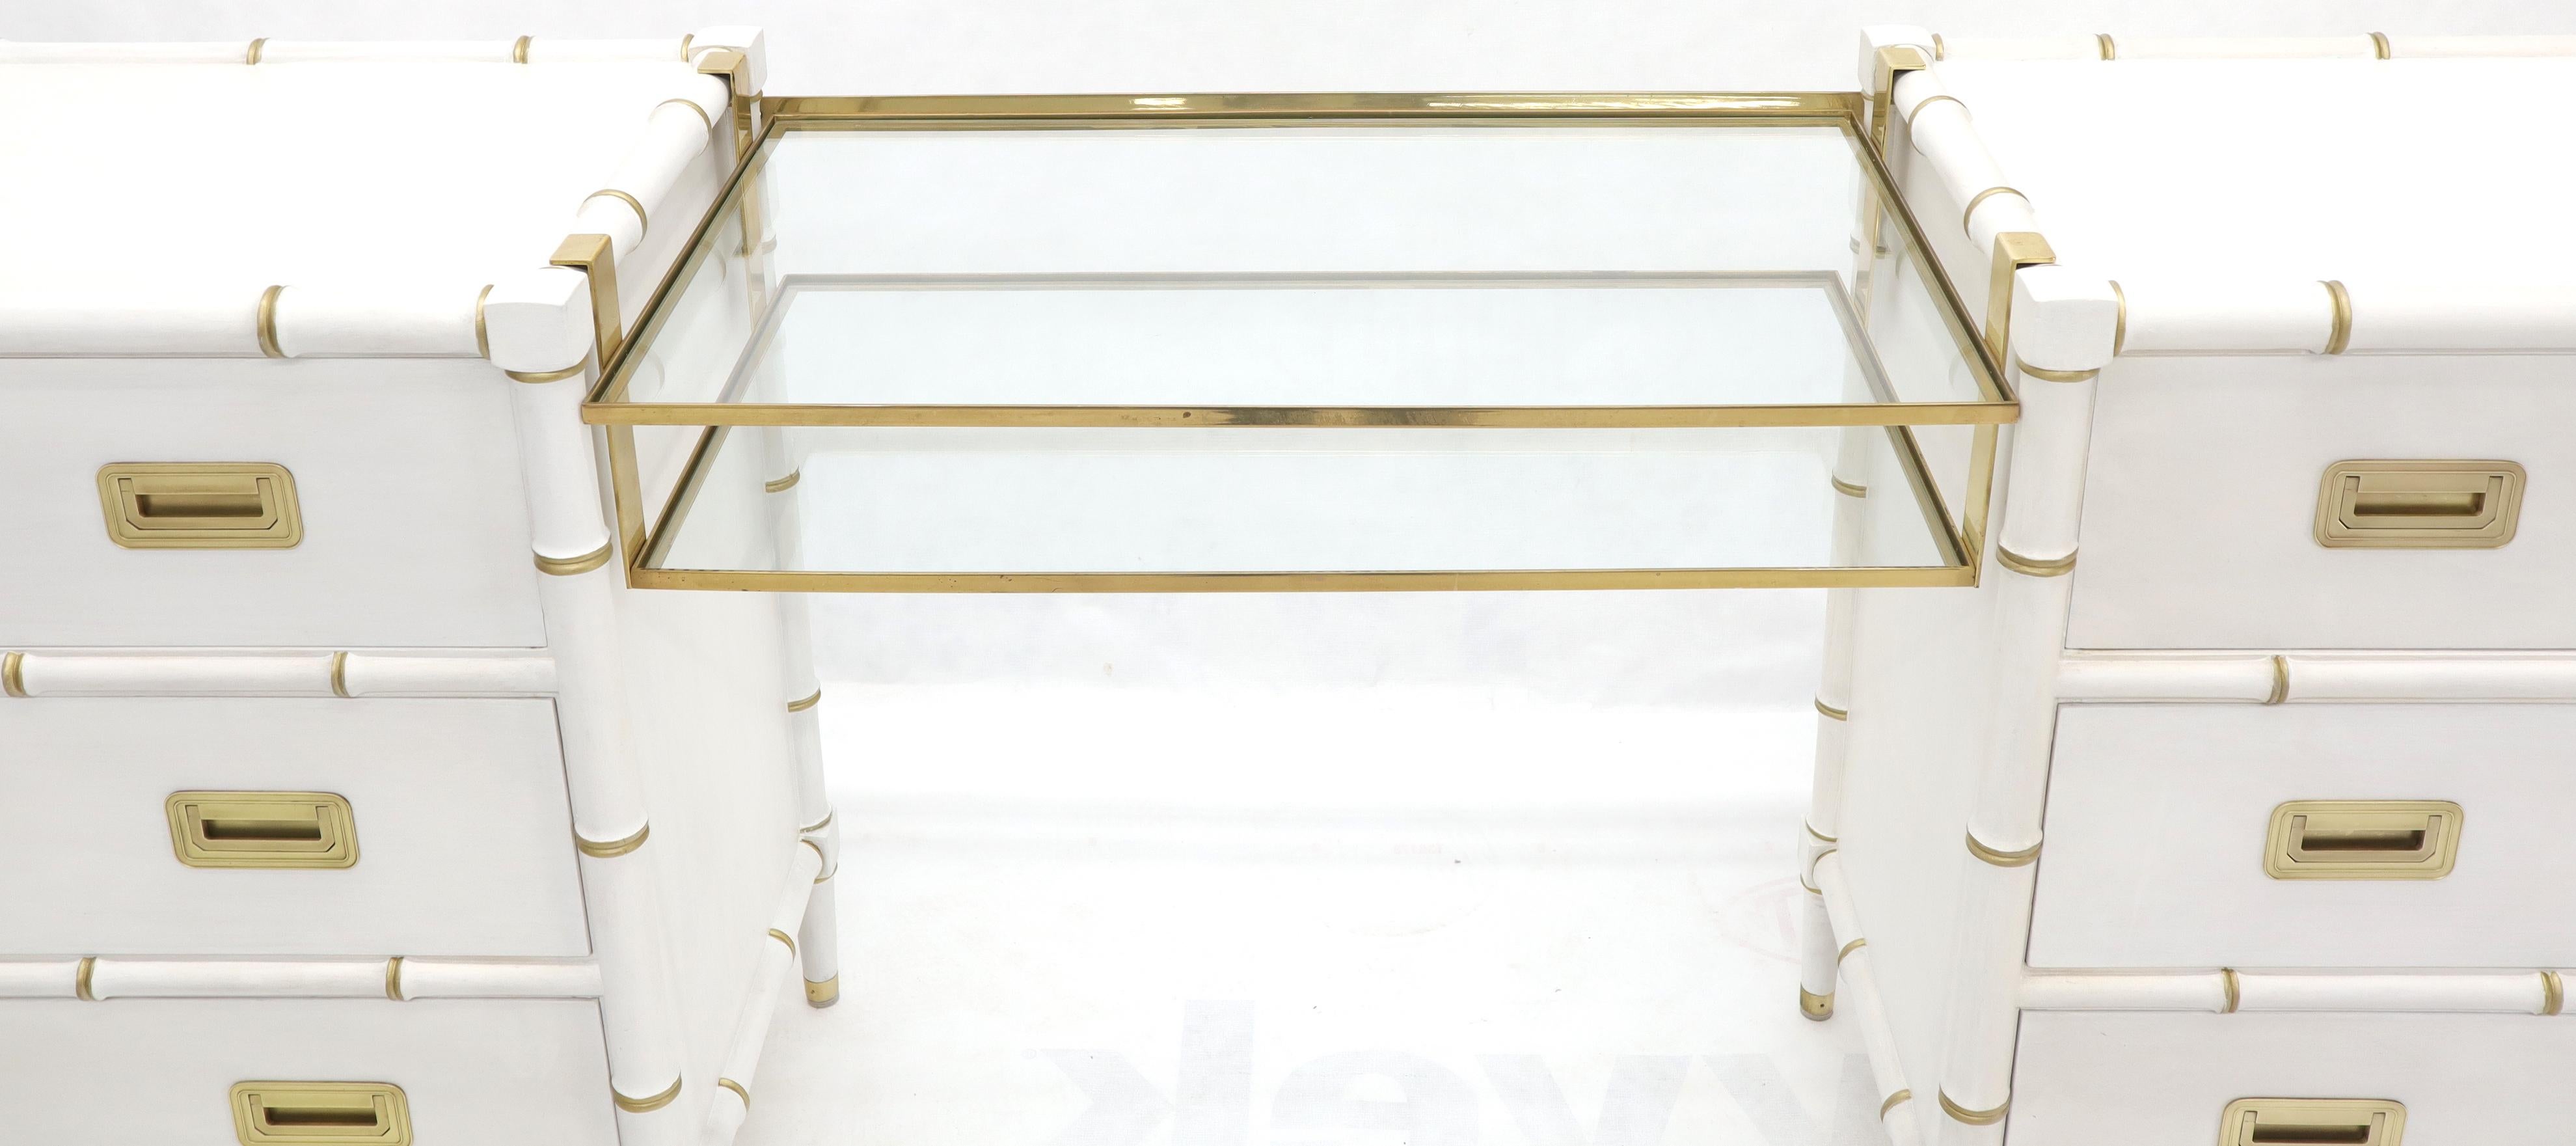 Pair of White Lacquer Brass Hardware Bachelor Chest with Suspended Brass Vanity For Sale 2